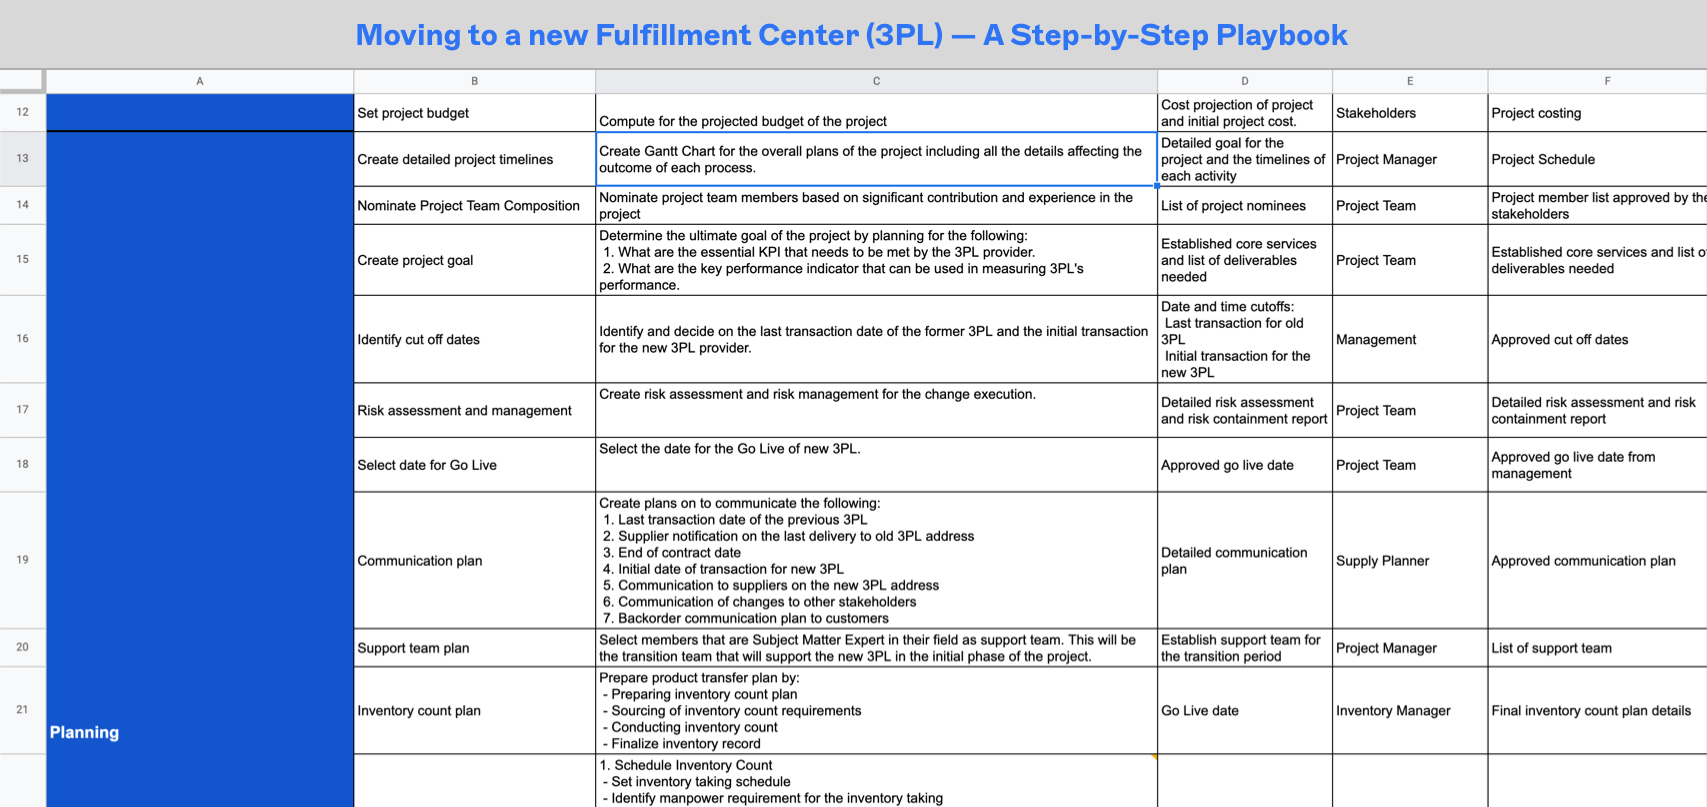 The 3PL implementation playbook covers the steps for moving from an existing fulfillment center to a new fulfillment center (3PL)